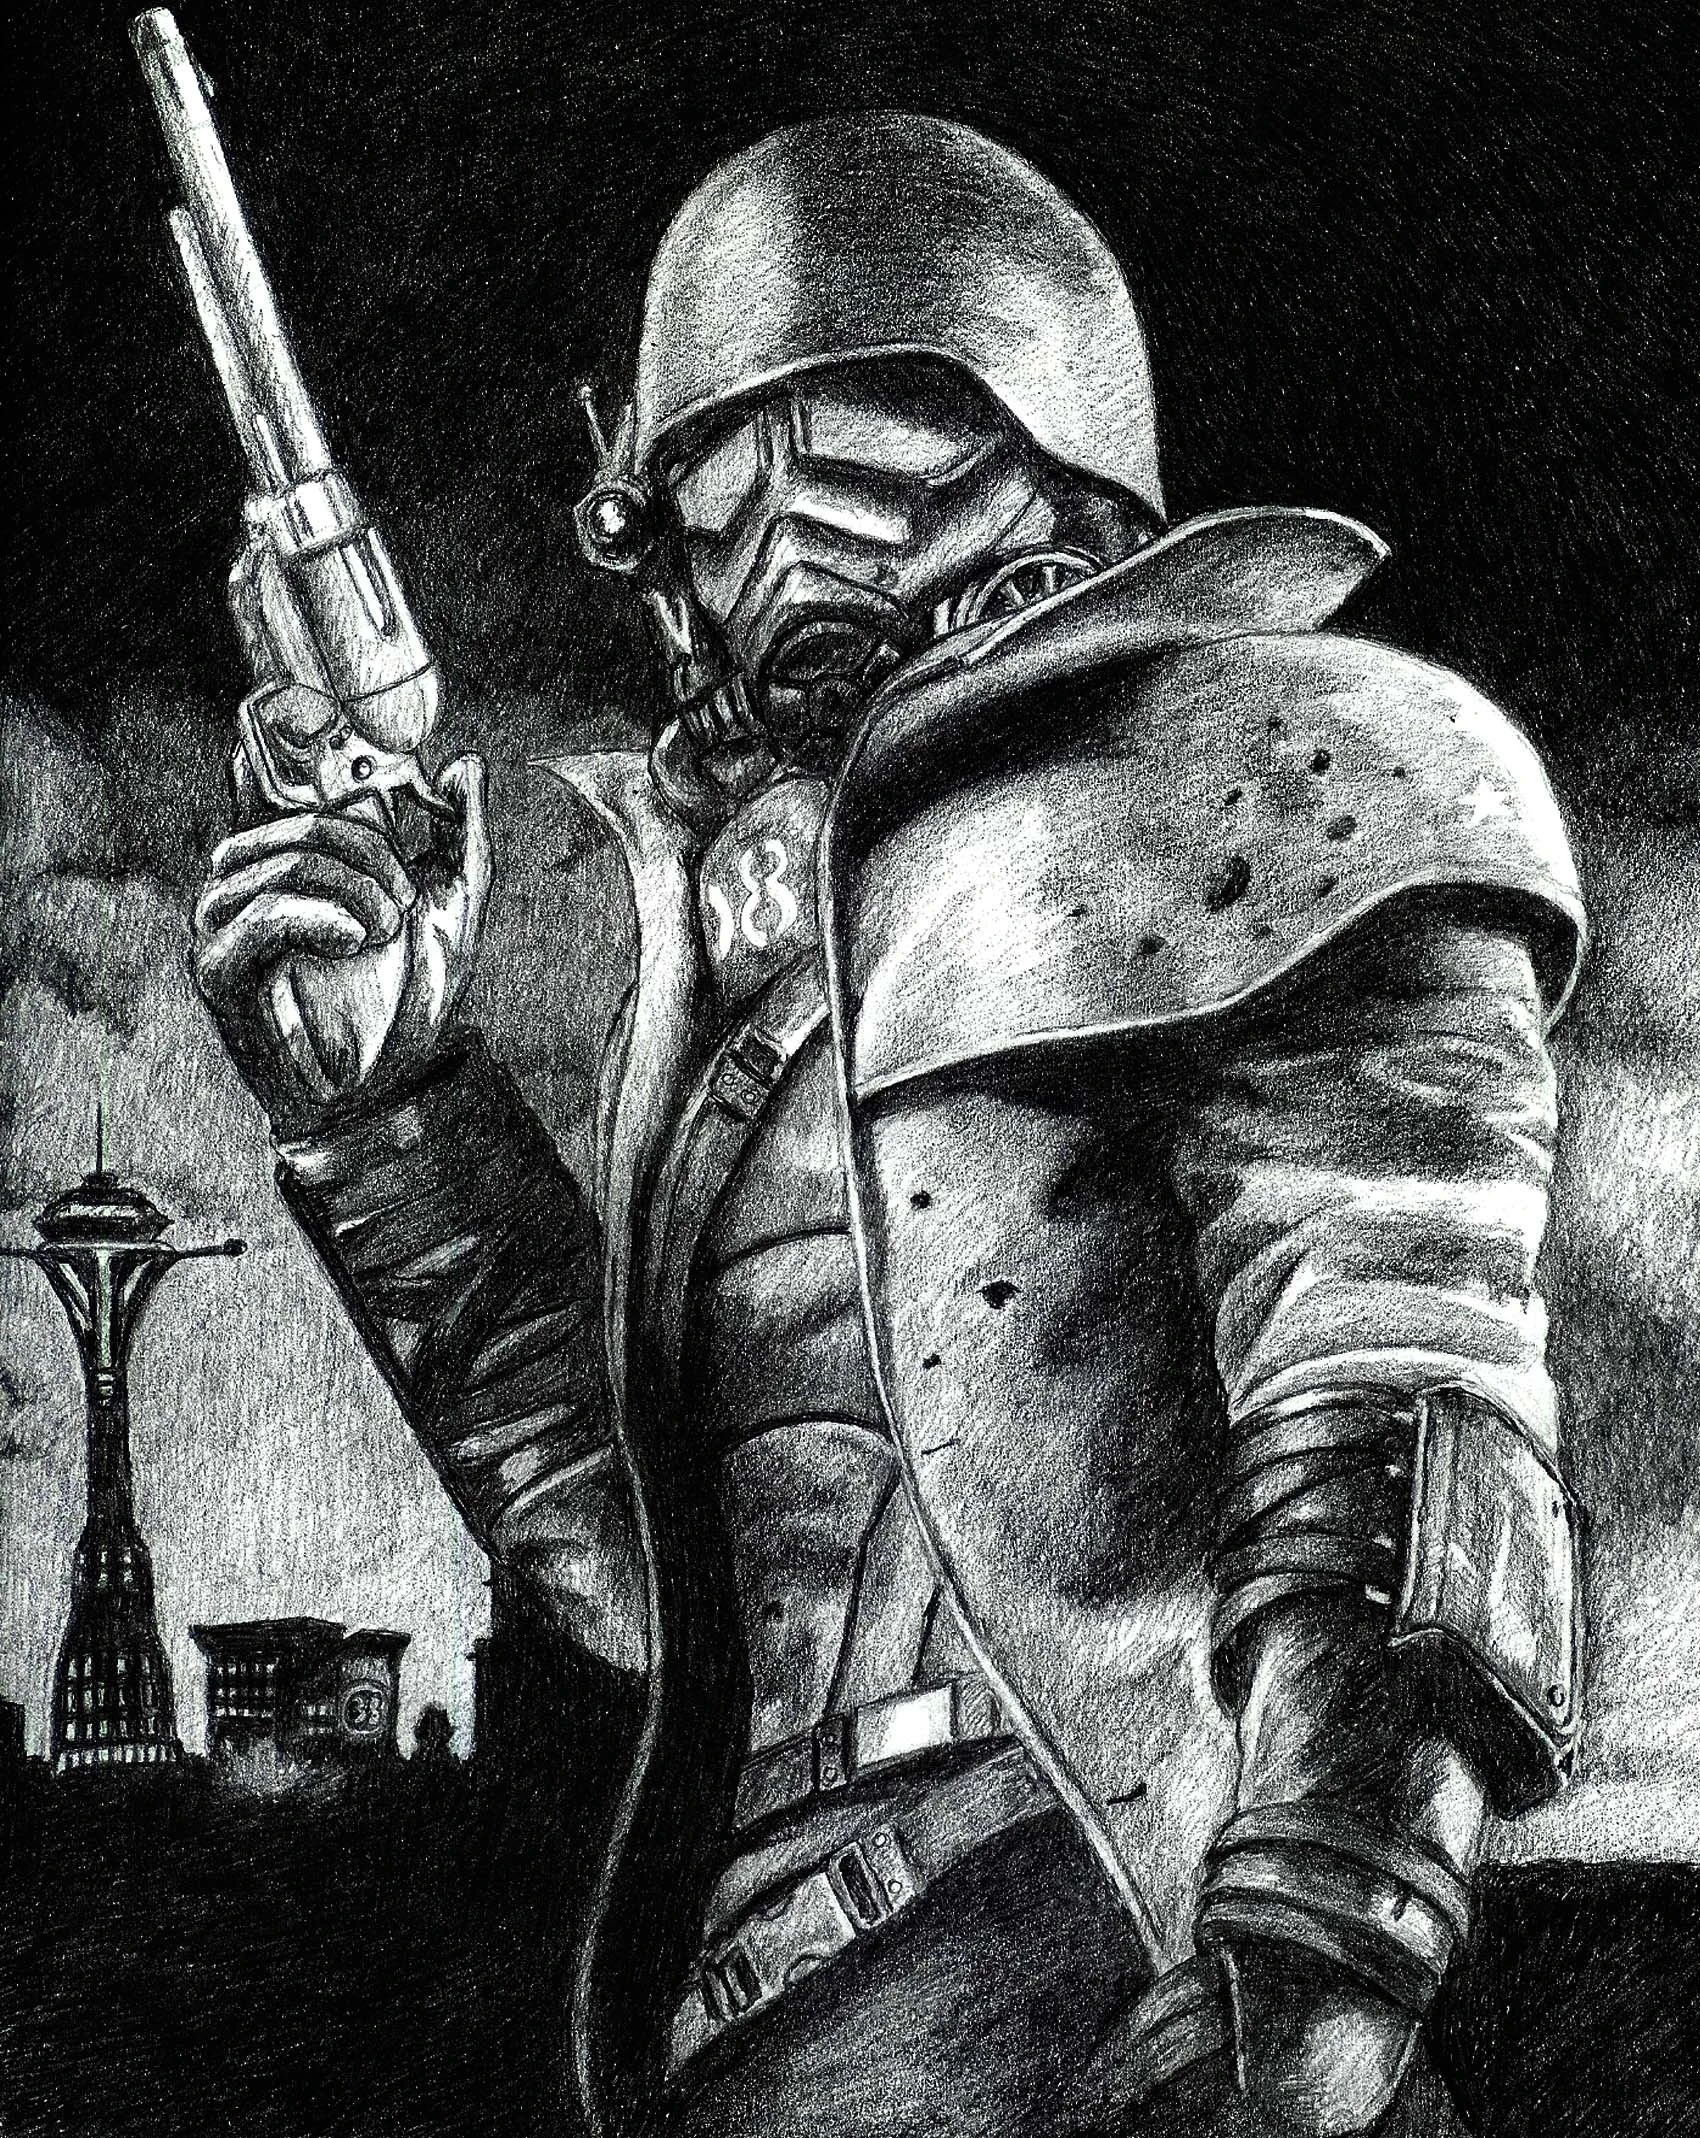 FaloutNV Drawing at Fallout New Vegas mods and community